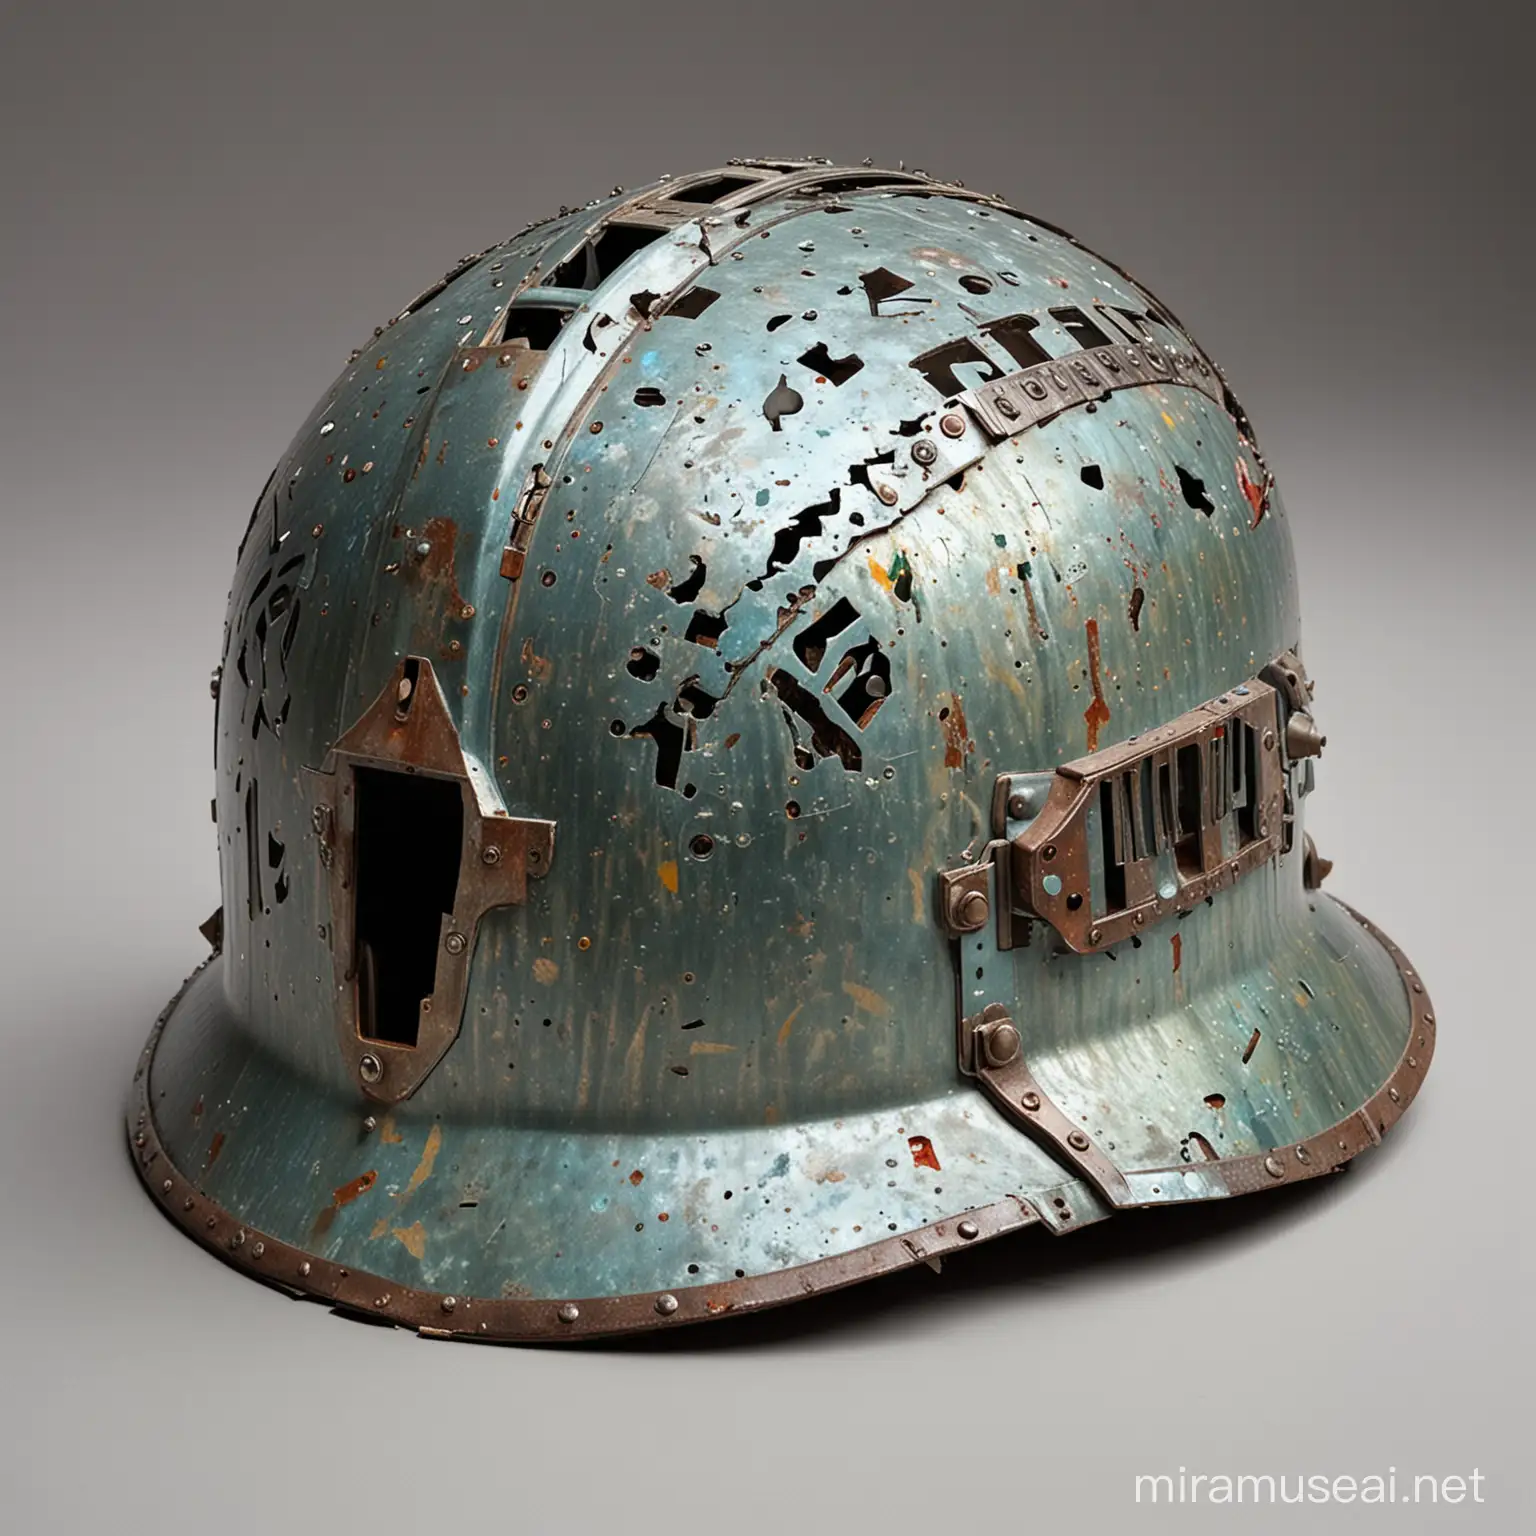 A world war 2 style helmet with an iridescent sheen and small circuits interconnected around it. It is damaged, broken and bloodstained. 